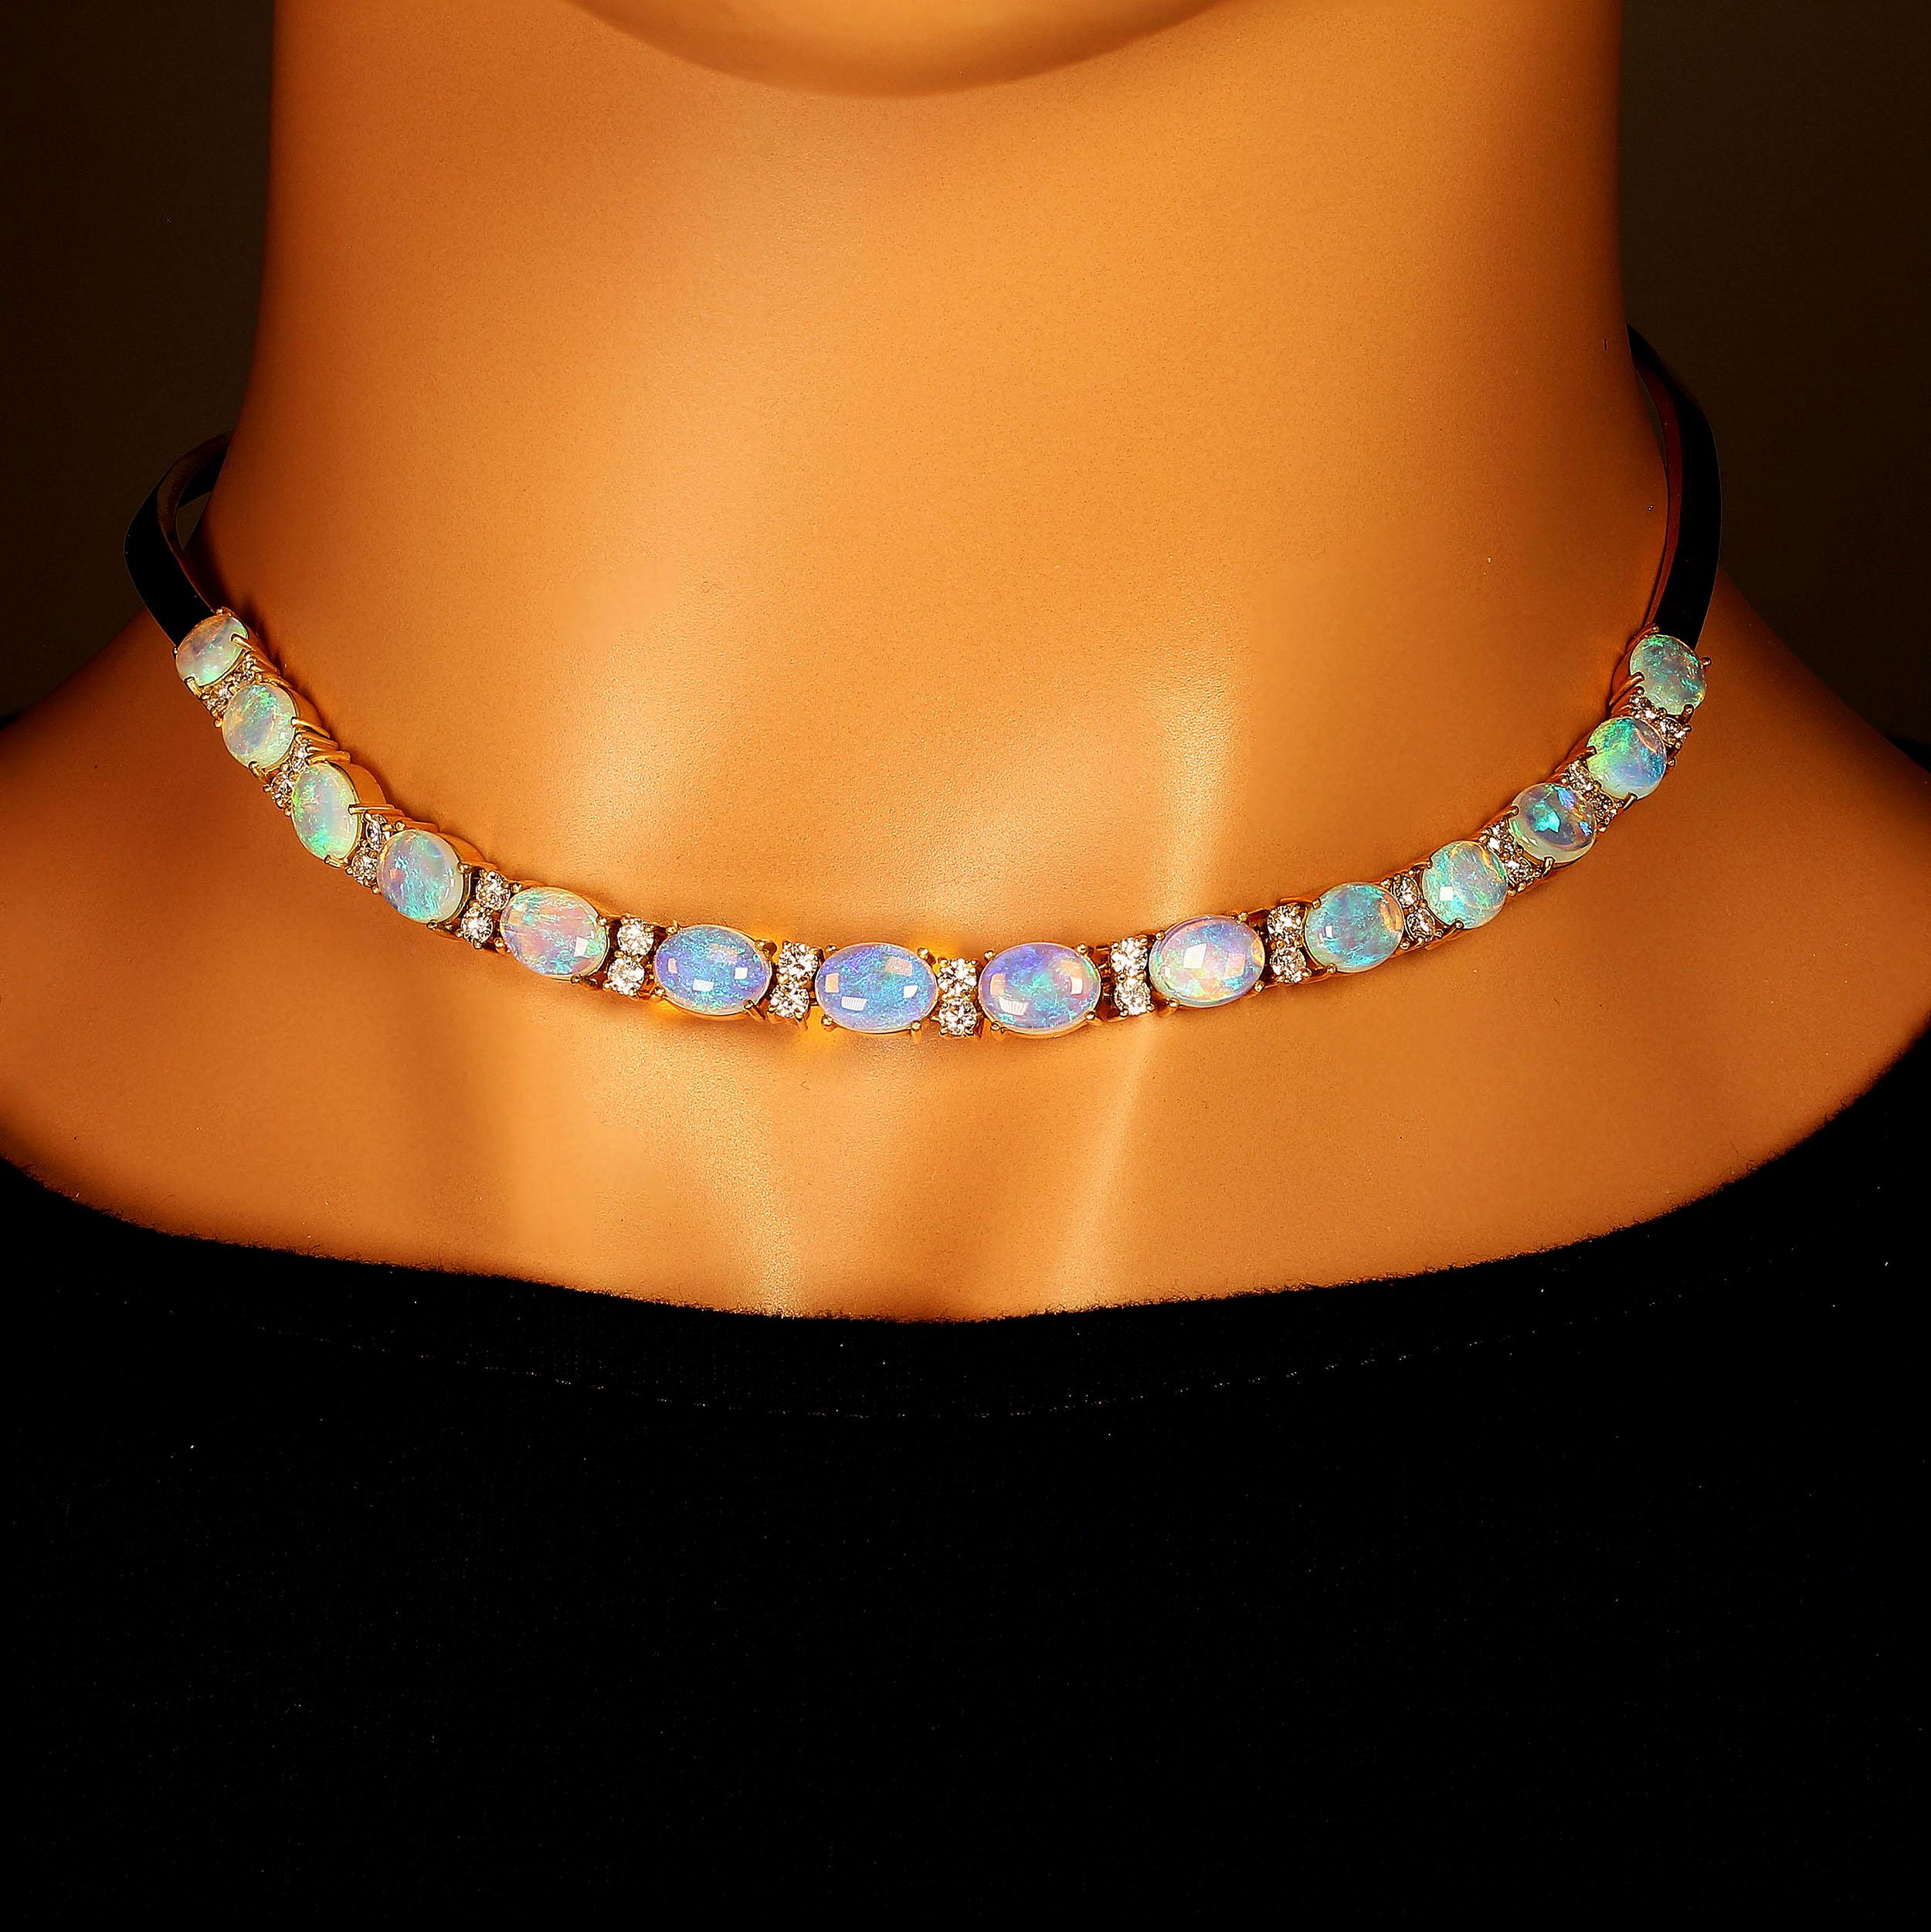 Unique hand made 18K yellow gold, Opal and Diamond necklace.  This one of kind 15 inch collar necklace was created in Rio de Janeiro of 14 oval (8 X 6 MM) Opals with beautiful blue green flashes. These Opals are enhanced with 26 Diamonds of